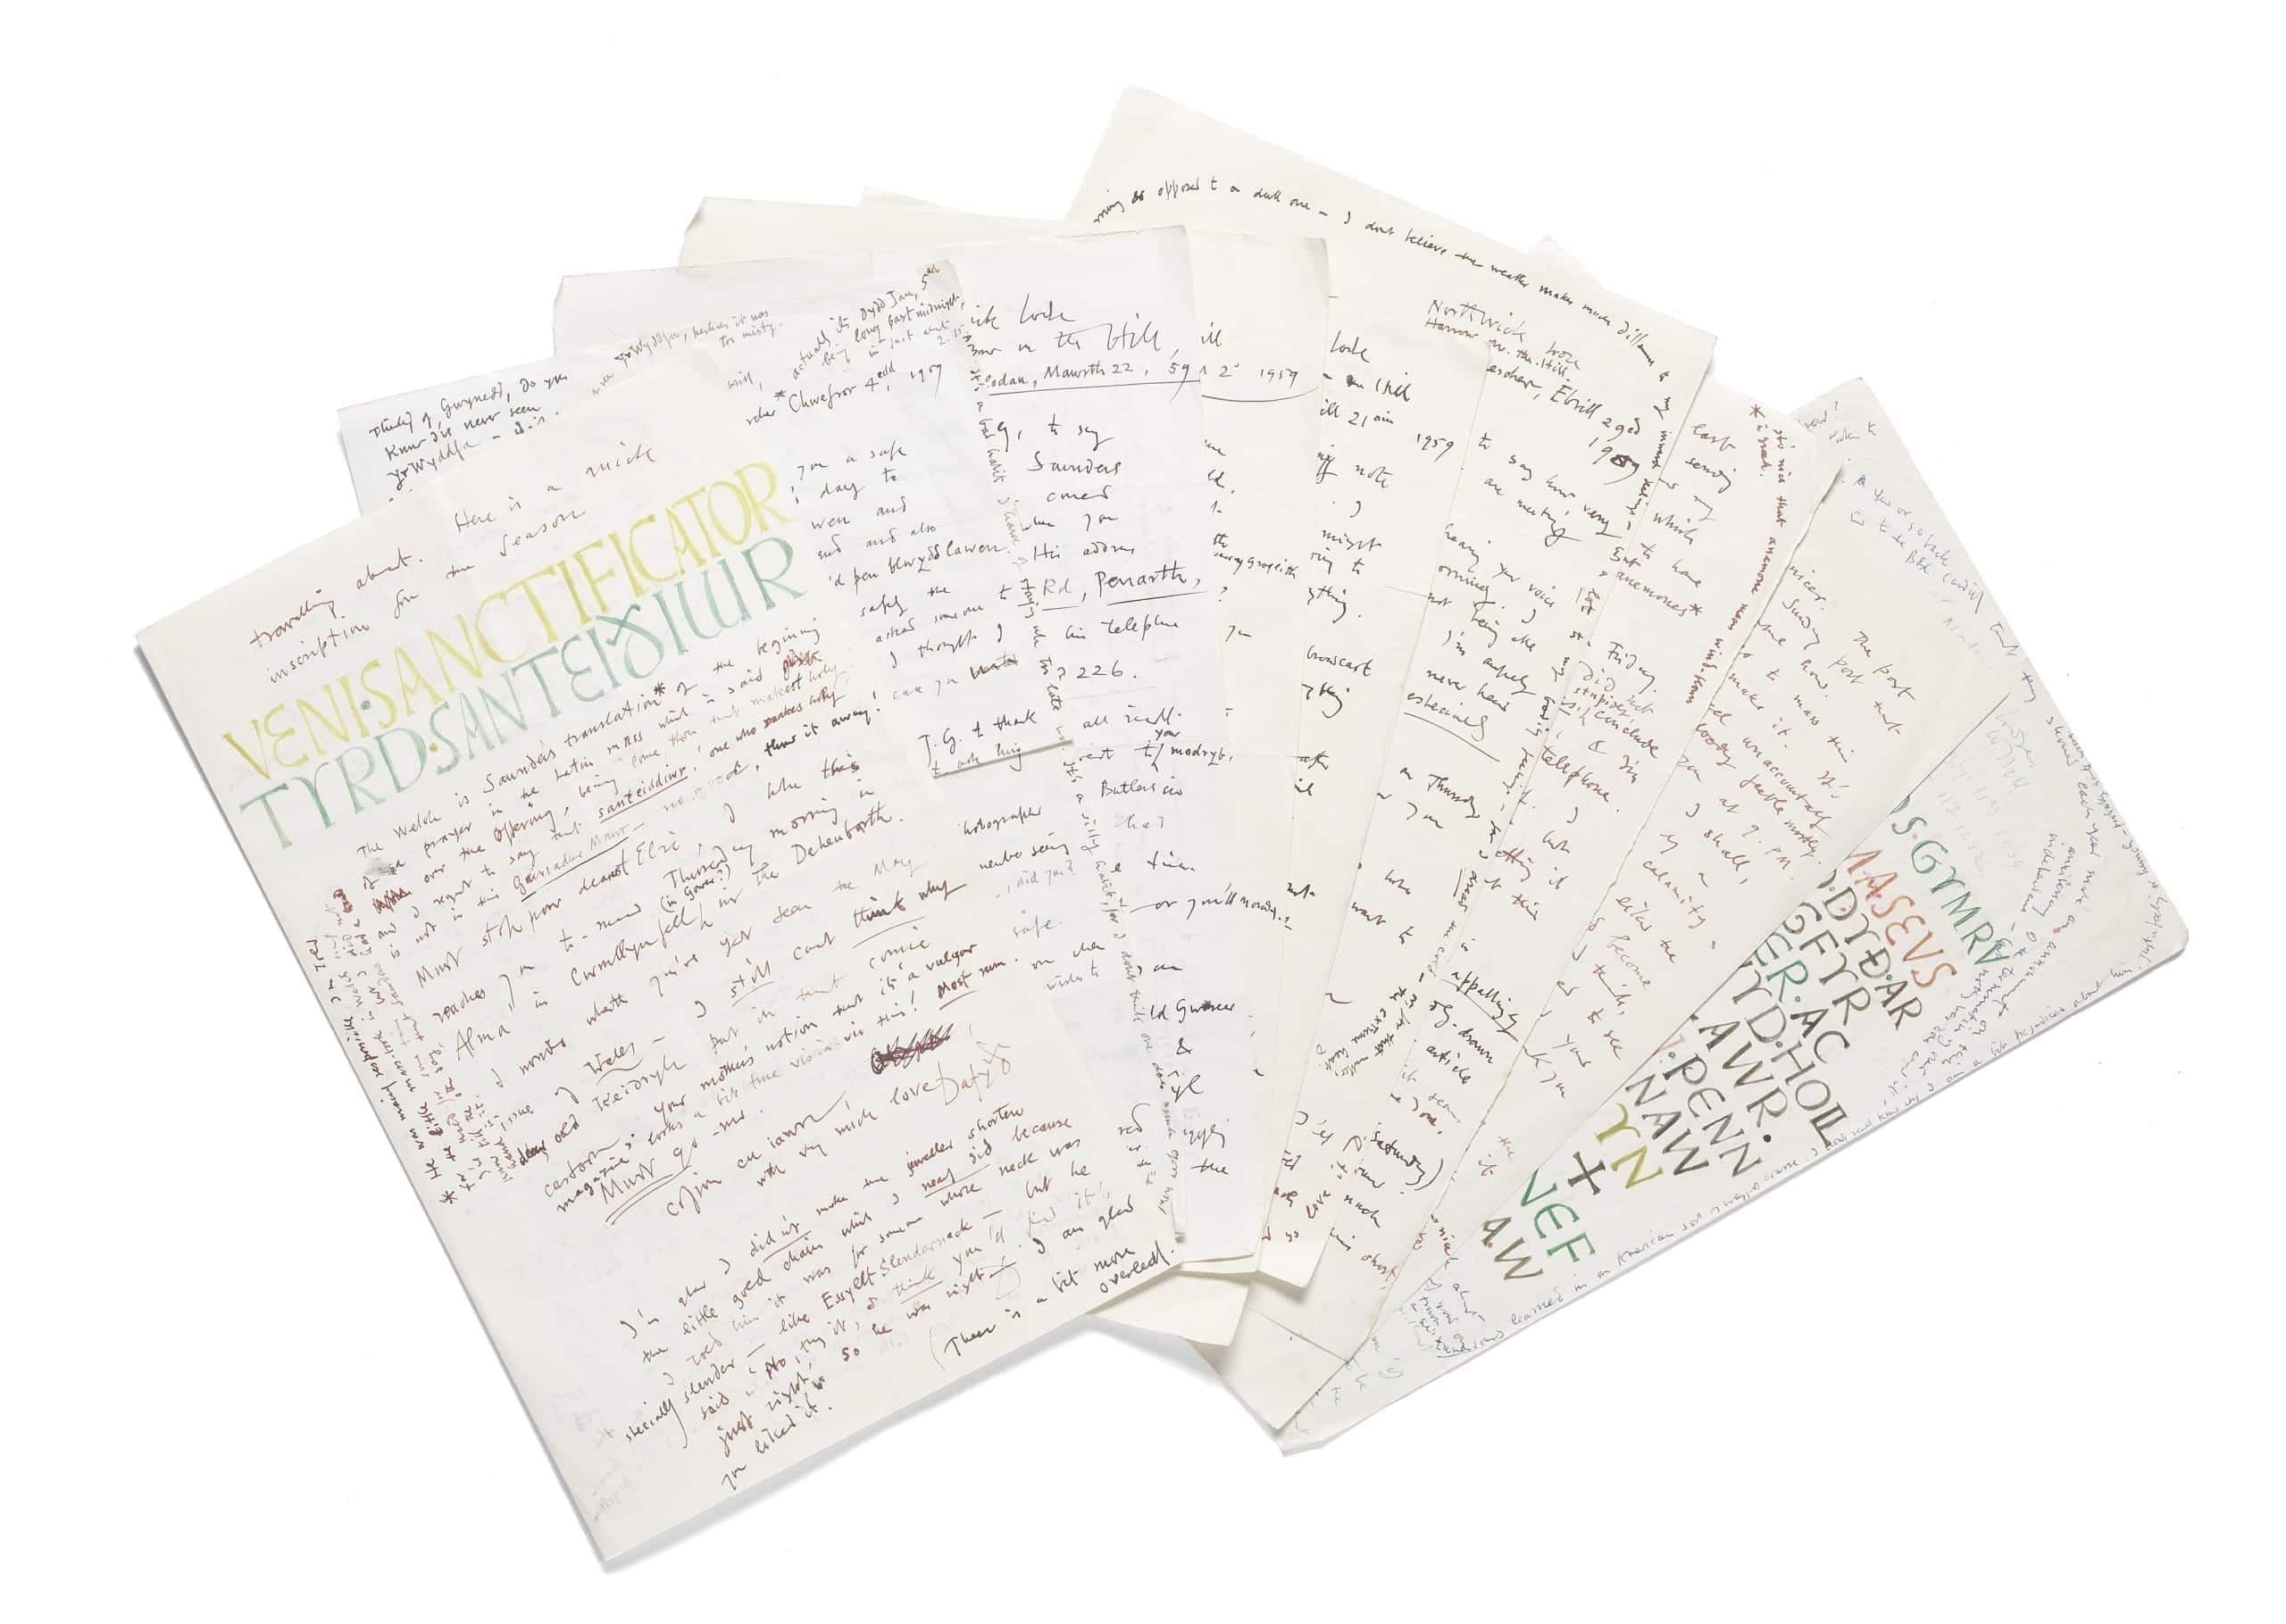 JONES (DAVID), Series of one hundred and twenty-six letters 4 February 1959 to 27 July 1974. Estimate: £30,000-50,000